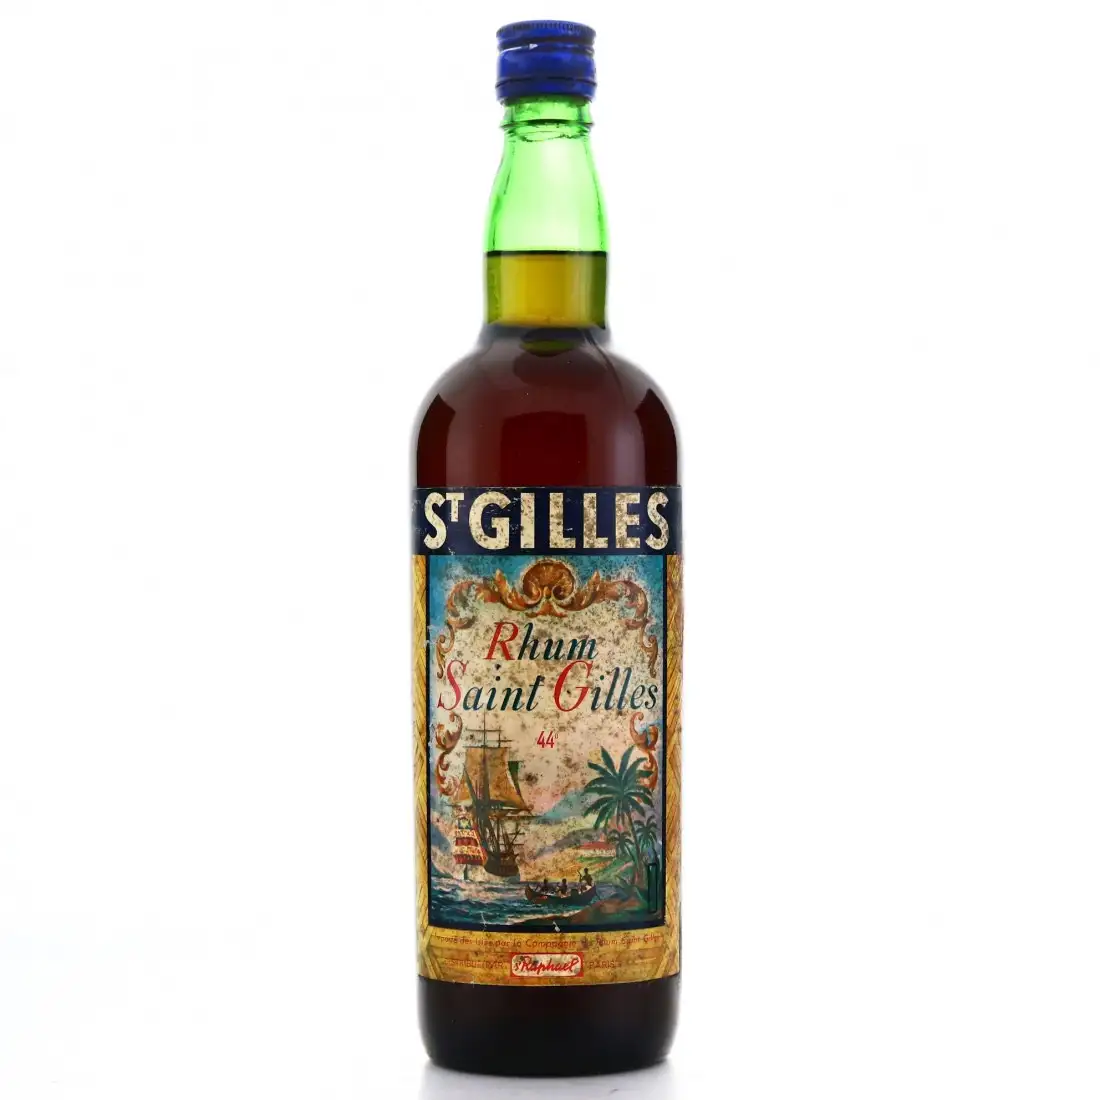 Image of the front of the bottle of the rum St.Gilles Rhum Saint Gilles